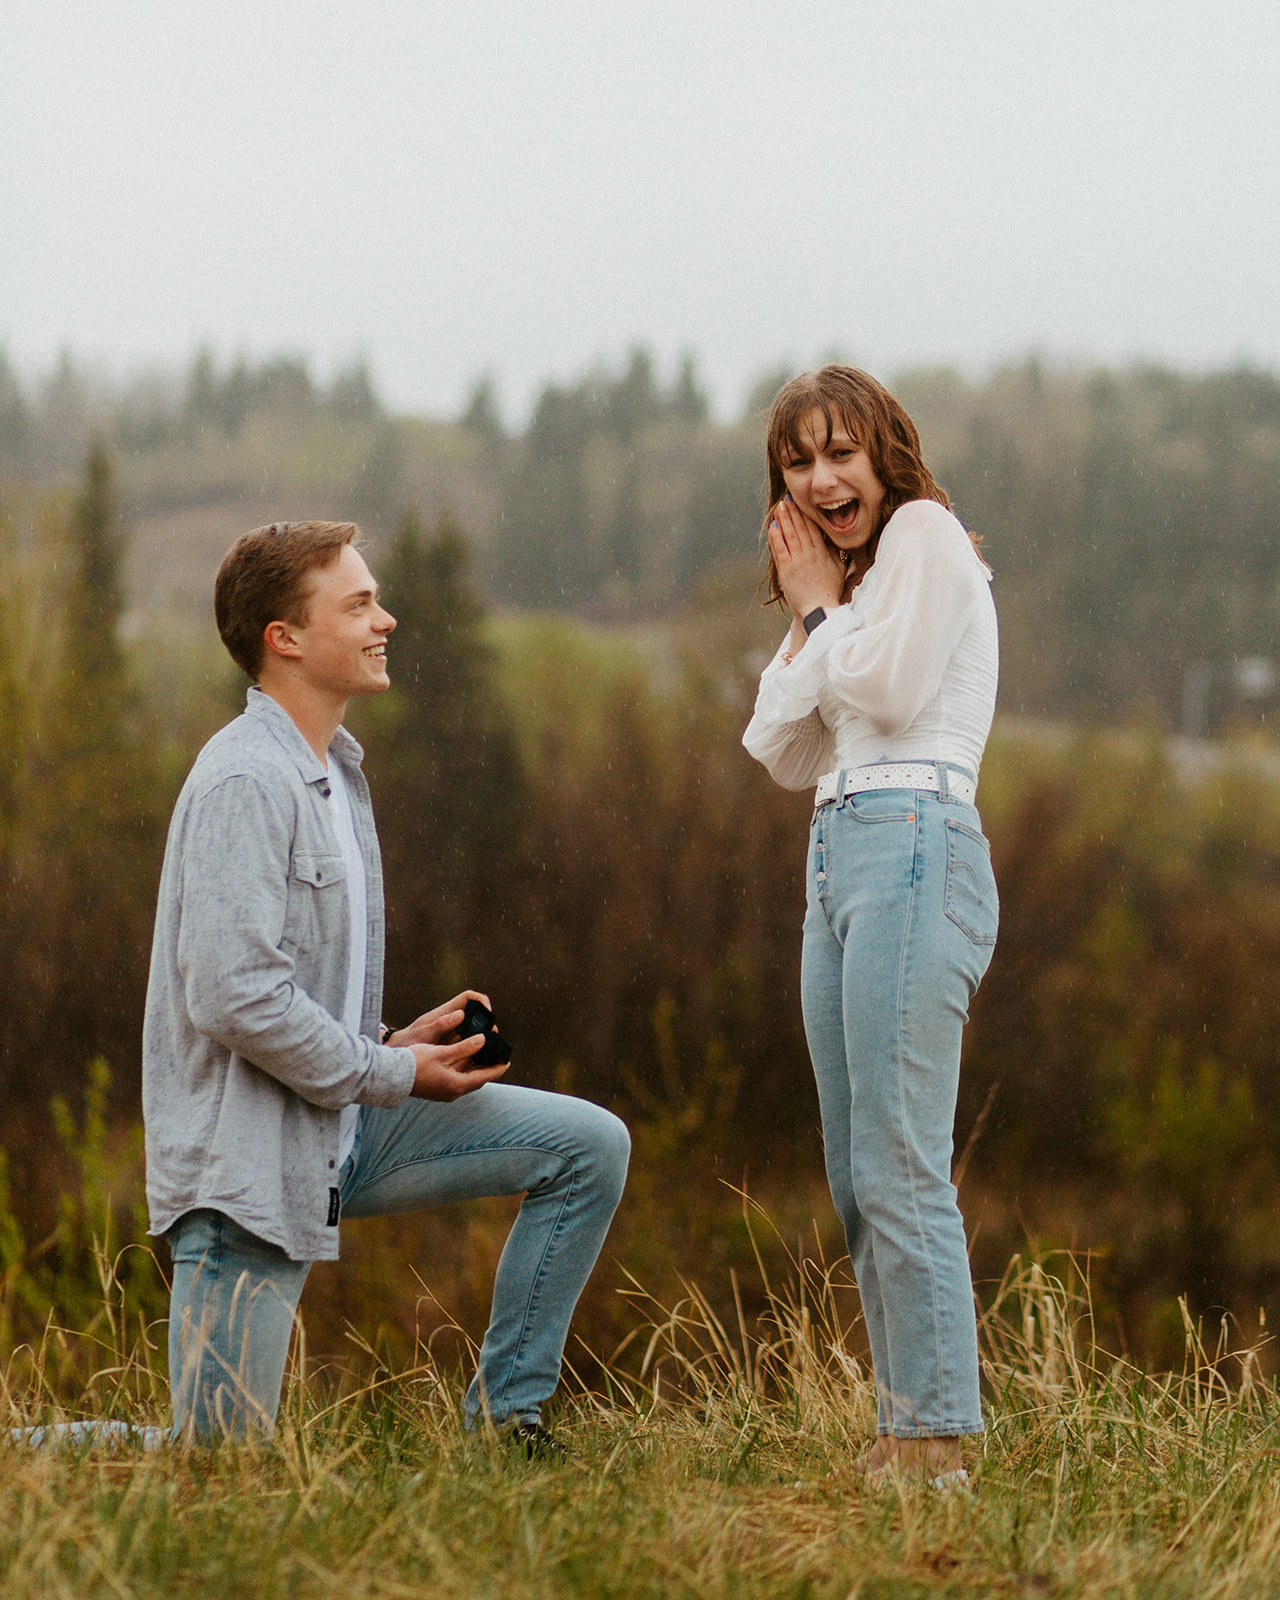 This adorable proposal session has us thinking of the Notebook